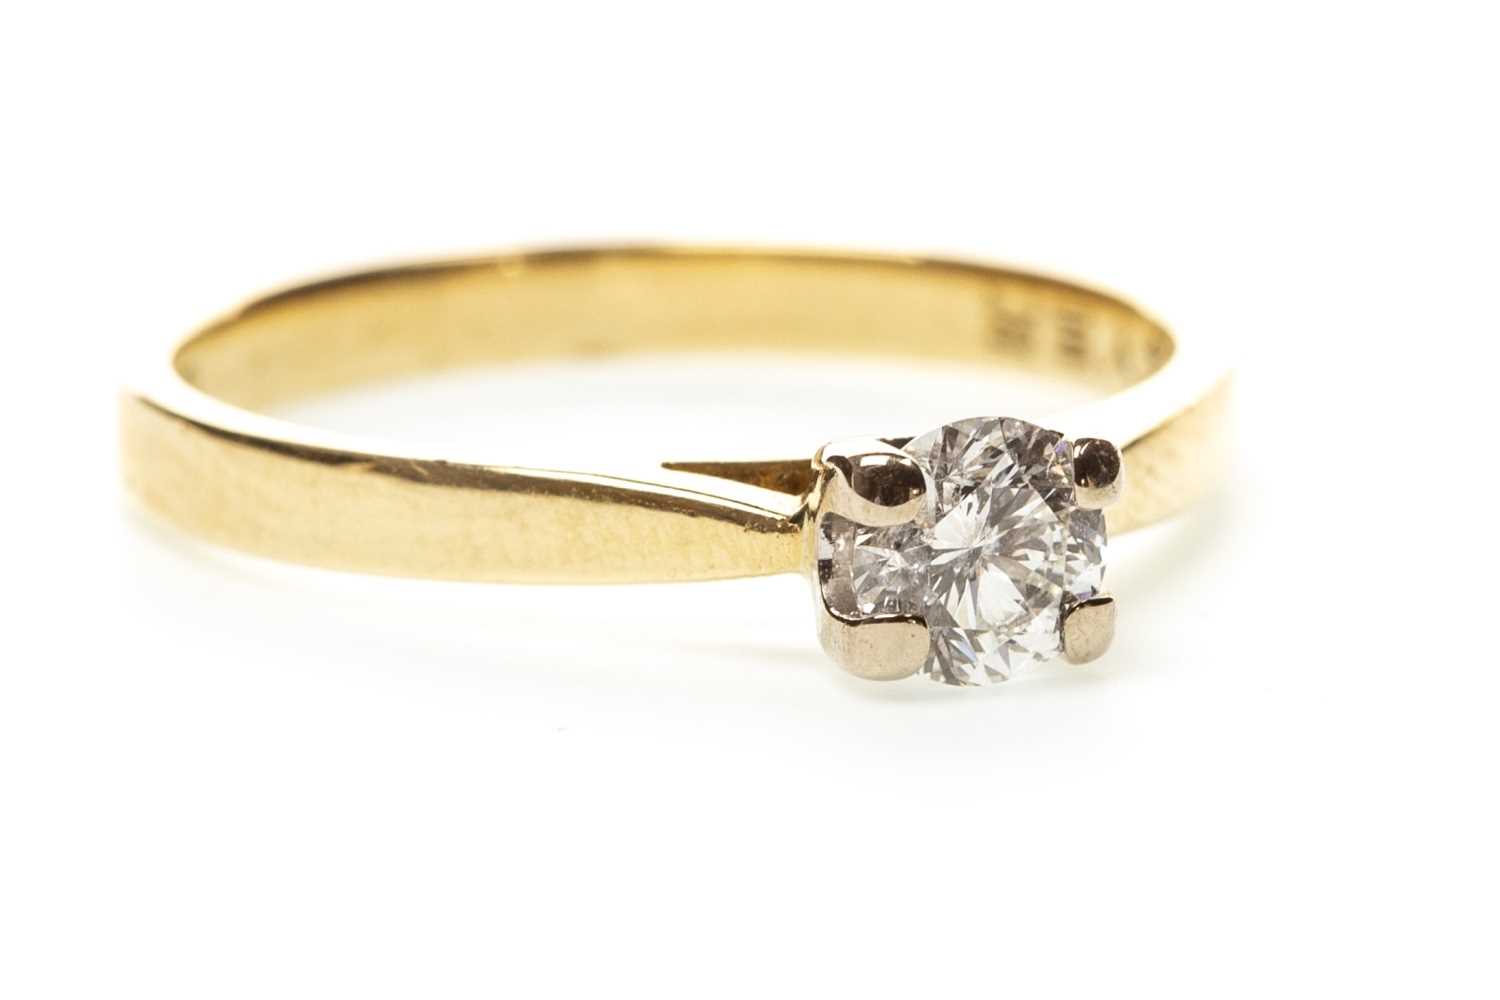 Lot 160 - A DIAMOND SOLITAIRE RING